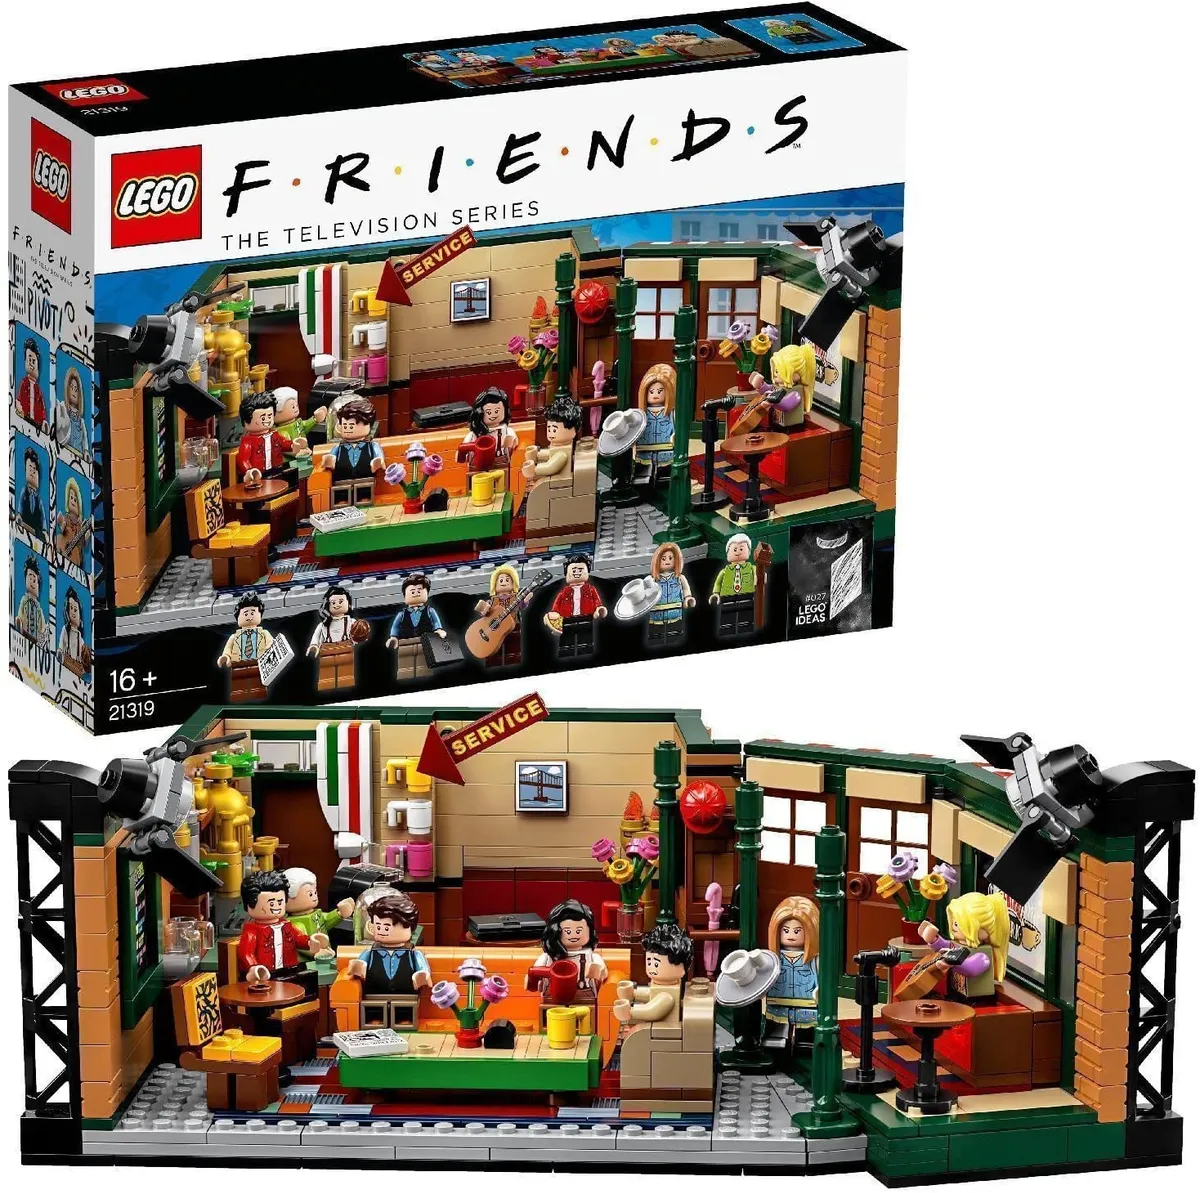 The Central Perk from TV show Friends made from Lego